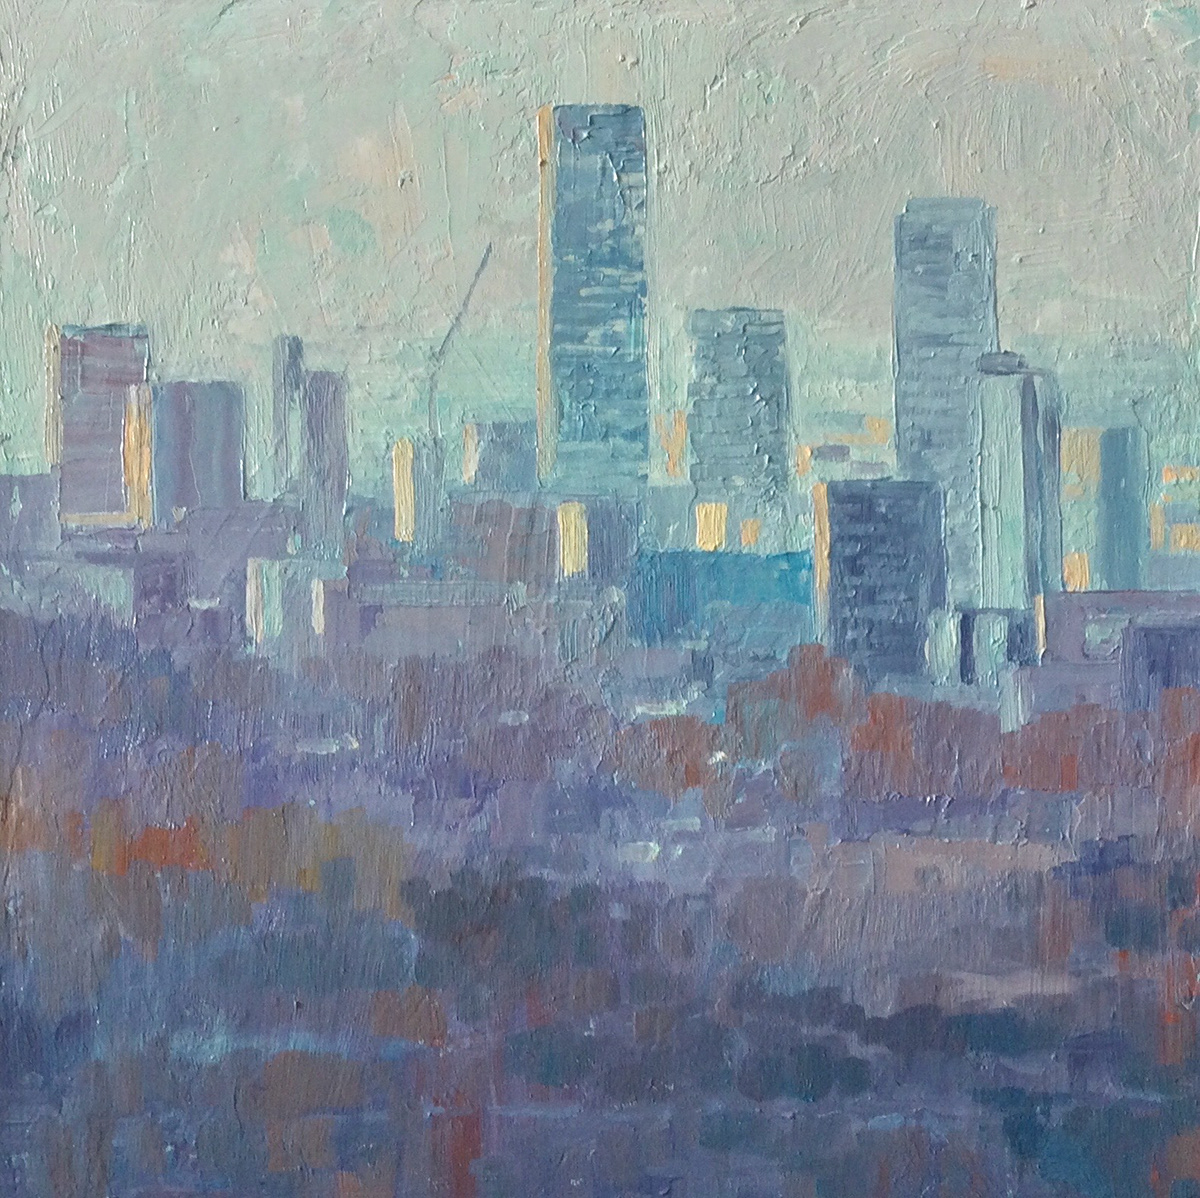 'Sun City' Oils on Canvas © Chris Cyprus Artist all rights reserved